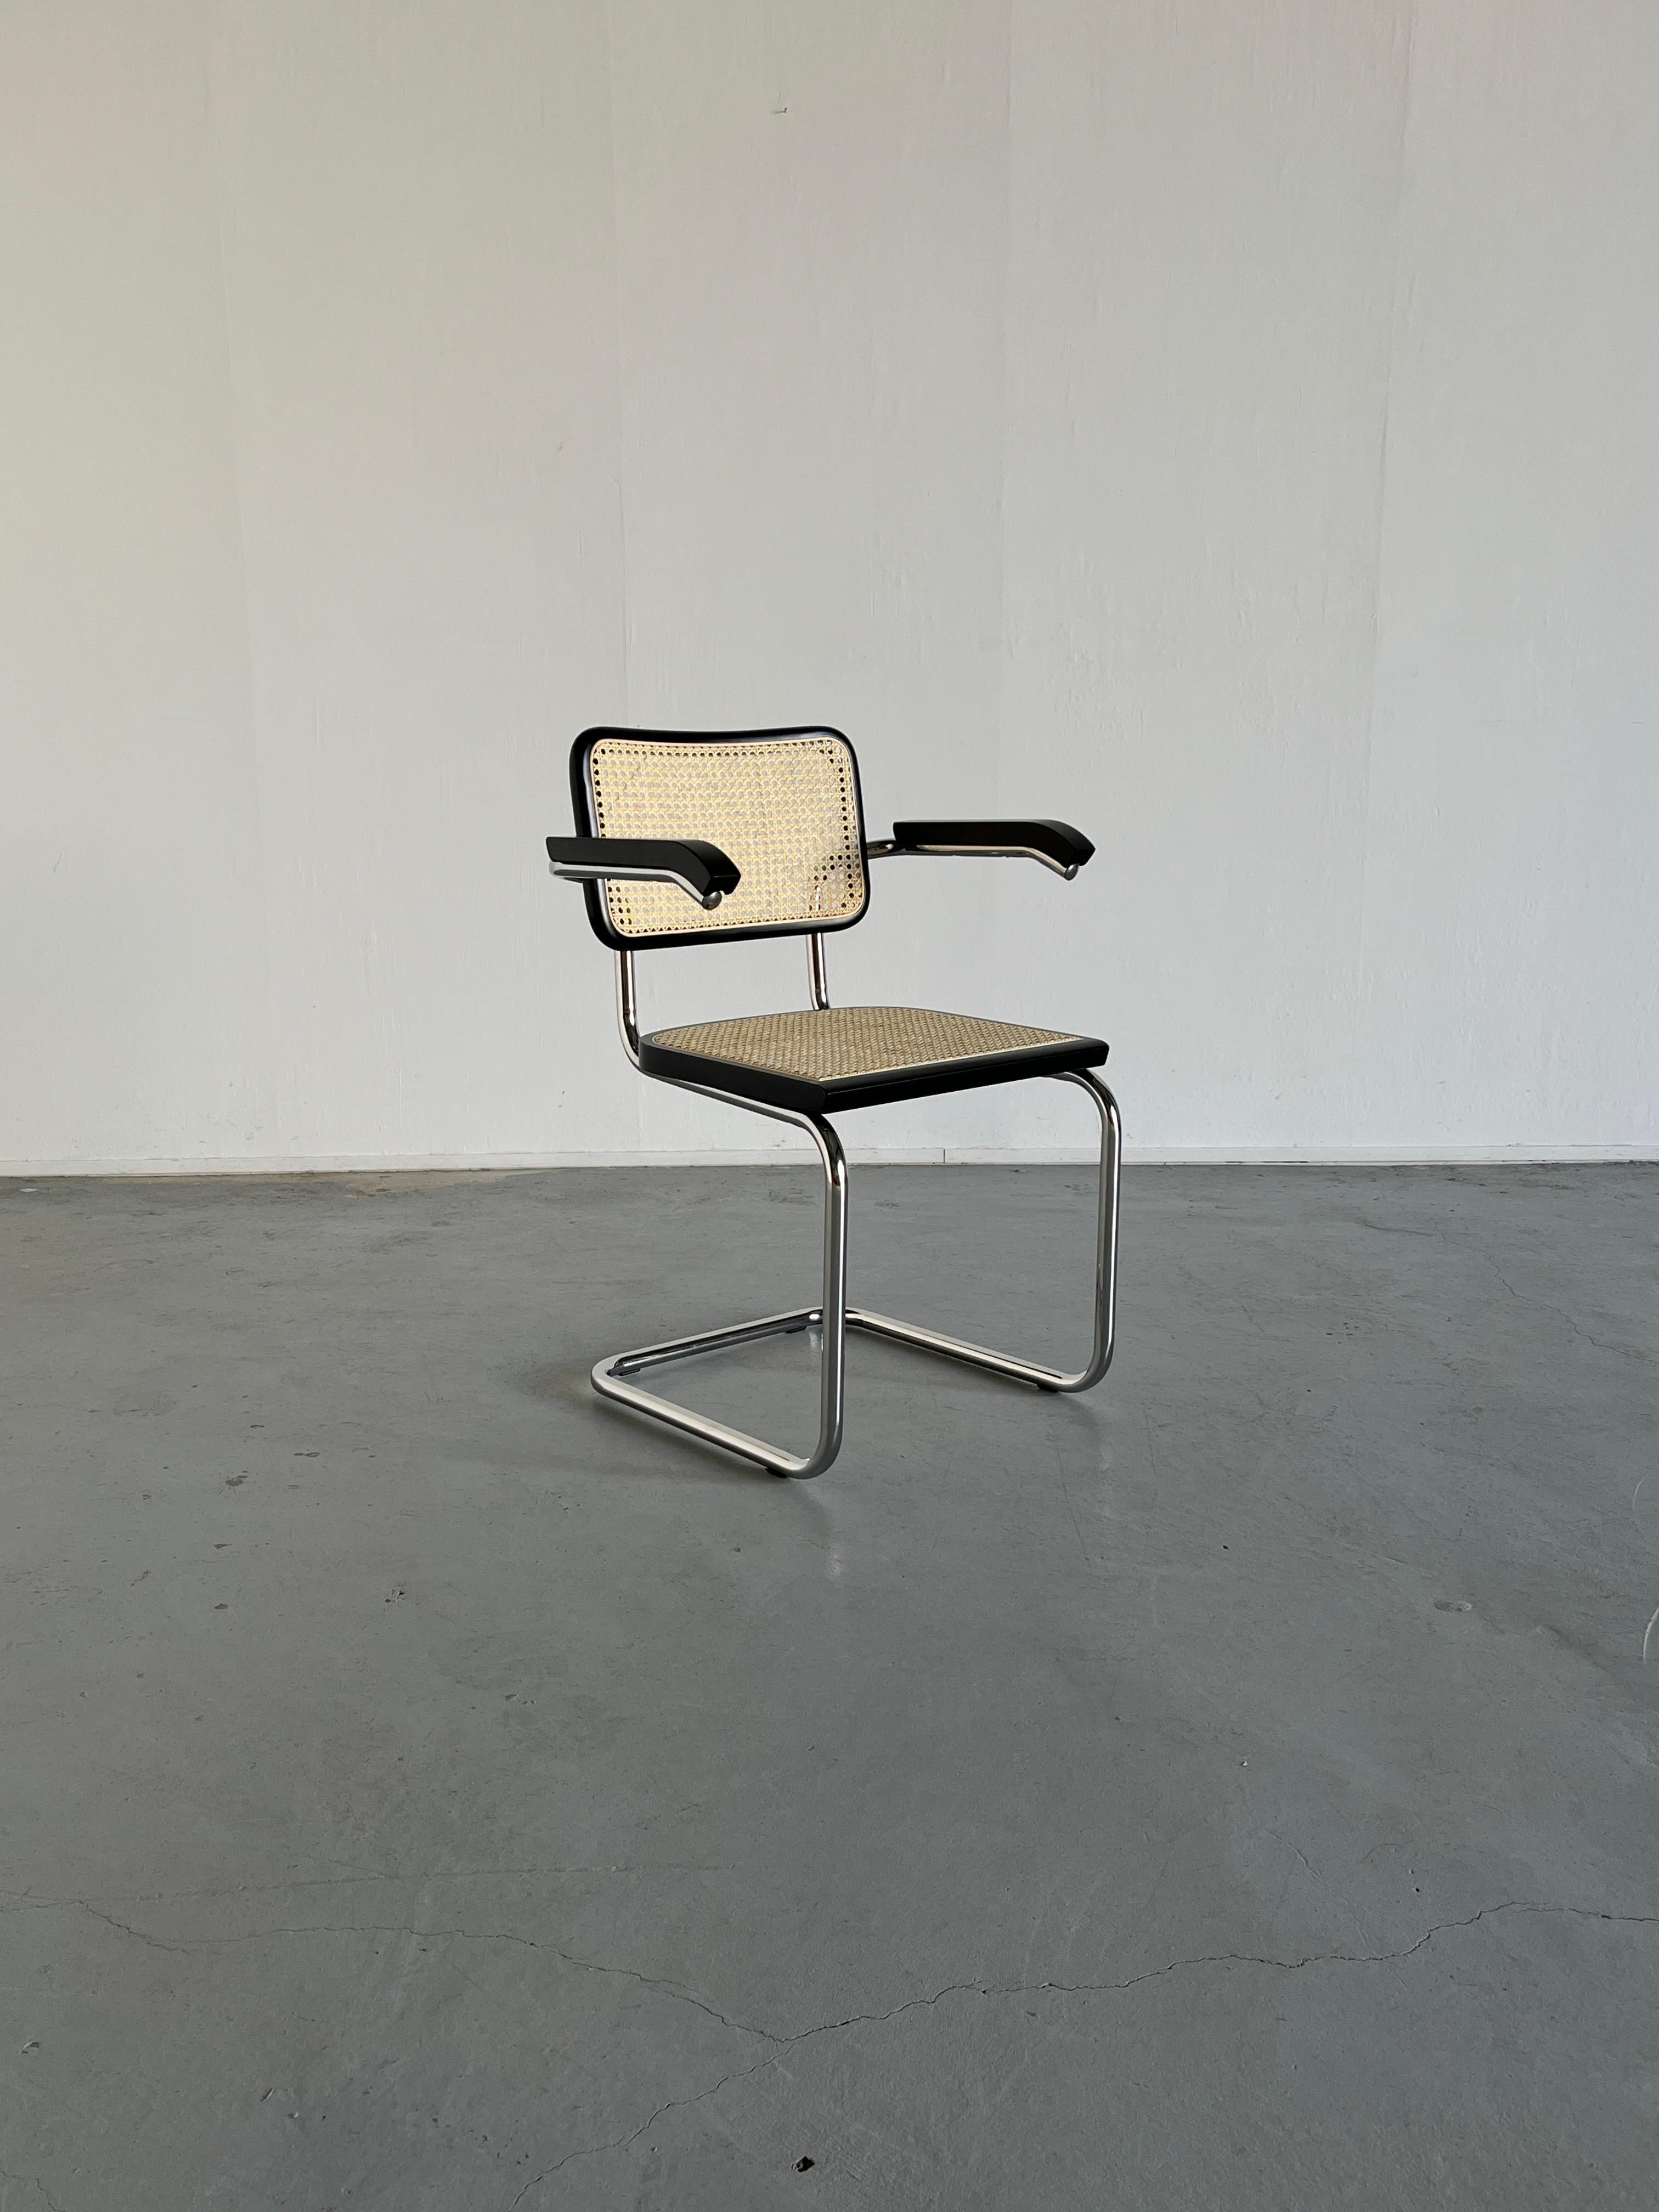 Marcel Breuer model B64 or 'Cesca' design chairs.

Unknown Italian production, circa 1995-2000.
Were a part of a local city hall office in Italy.

Fully restored in a black finish, with new European made cane. Chrome frames polished to perfection,